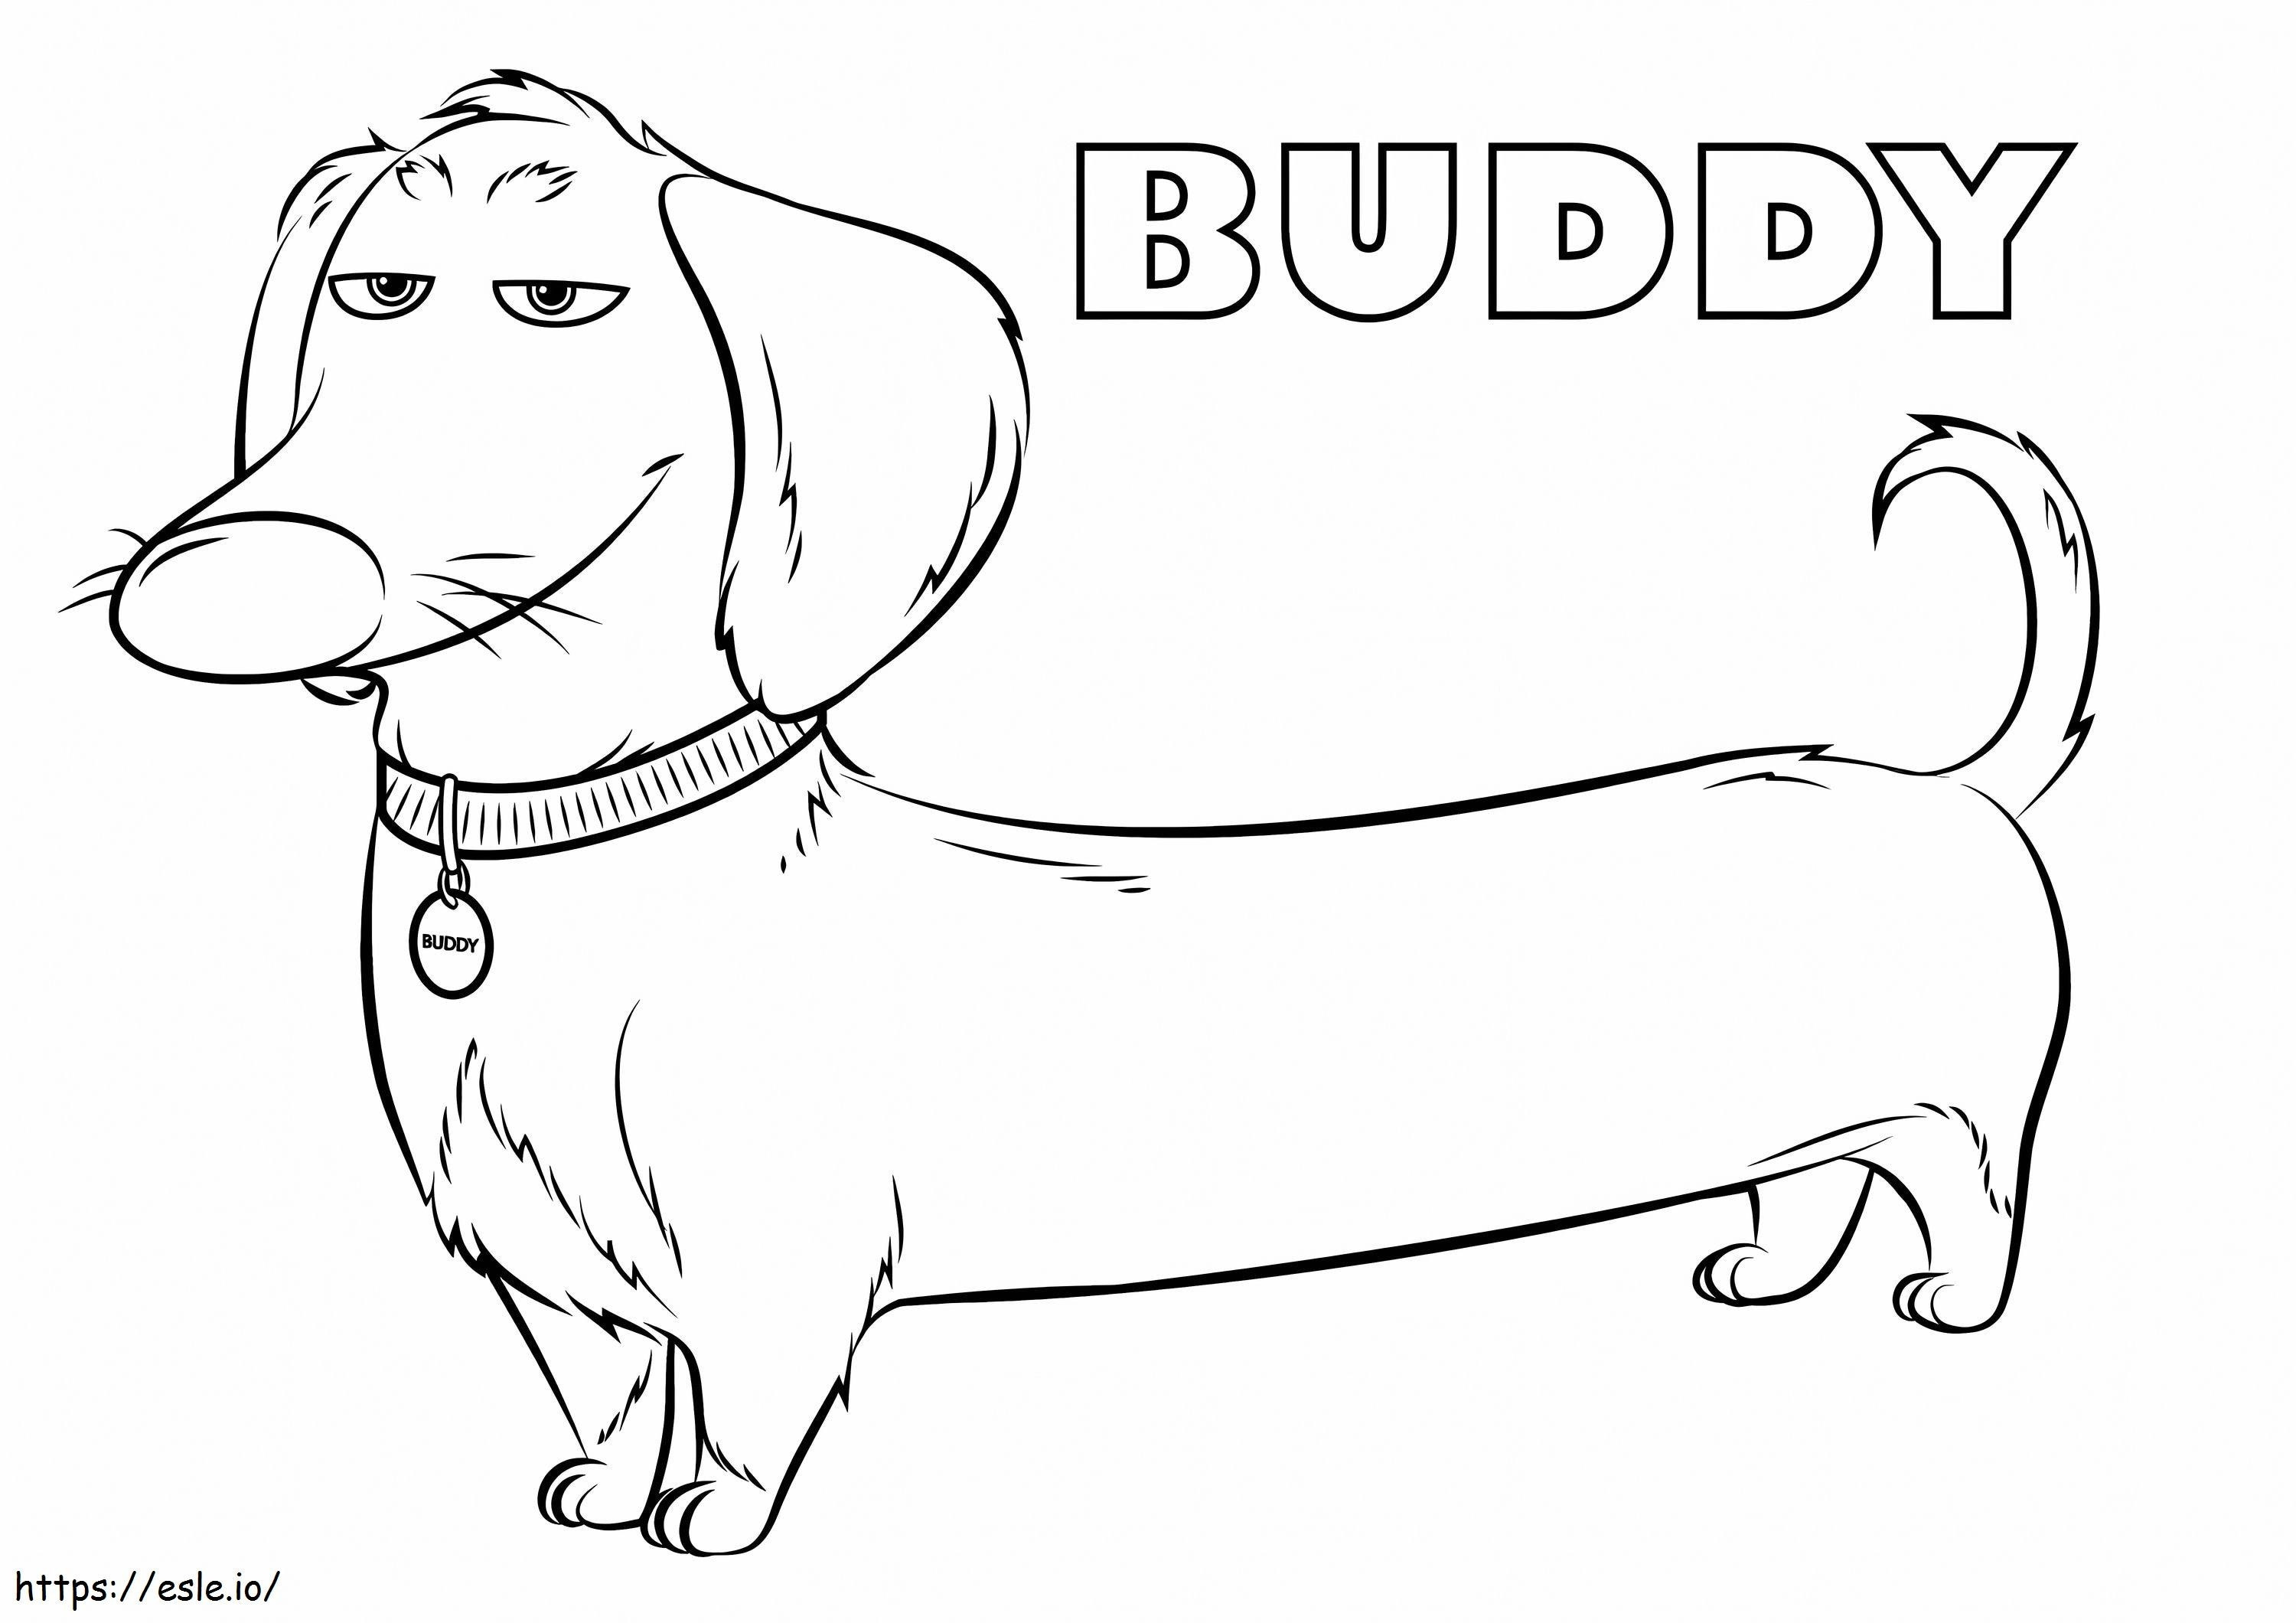 1559535057 Buddy A4 coloring page